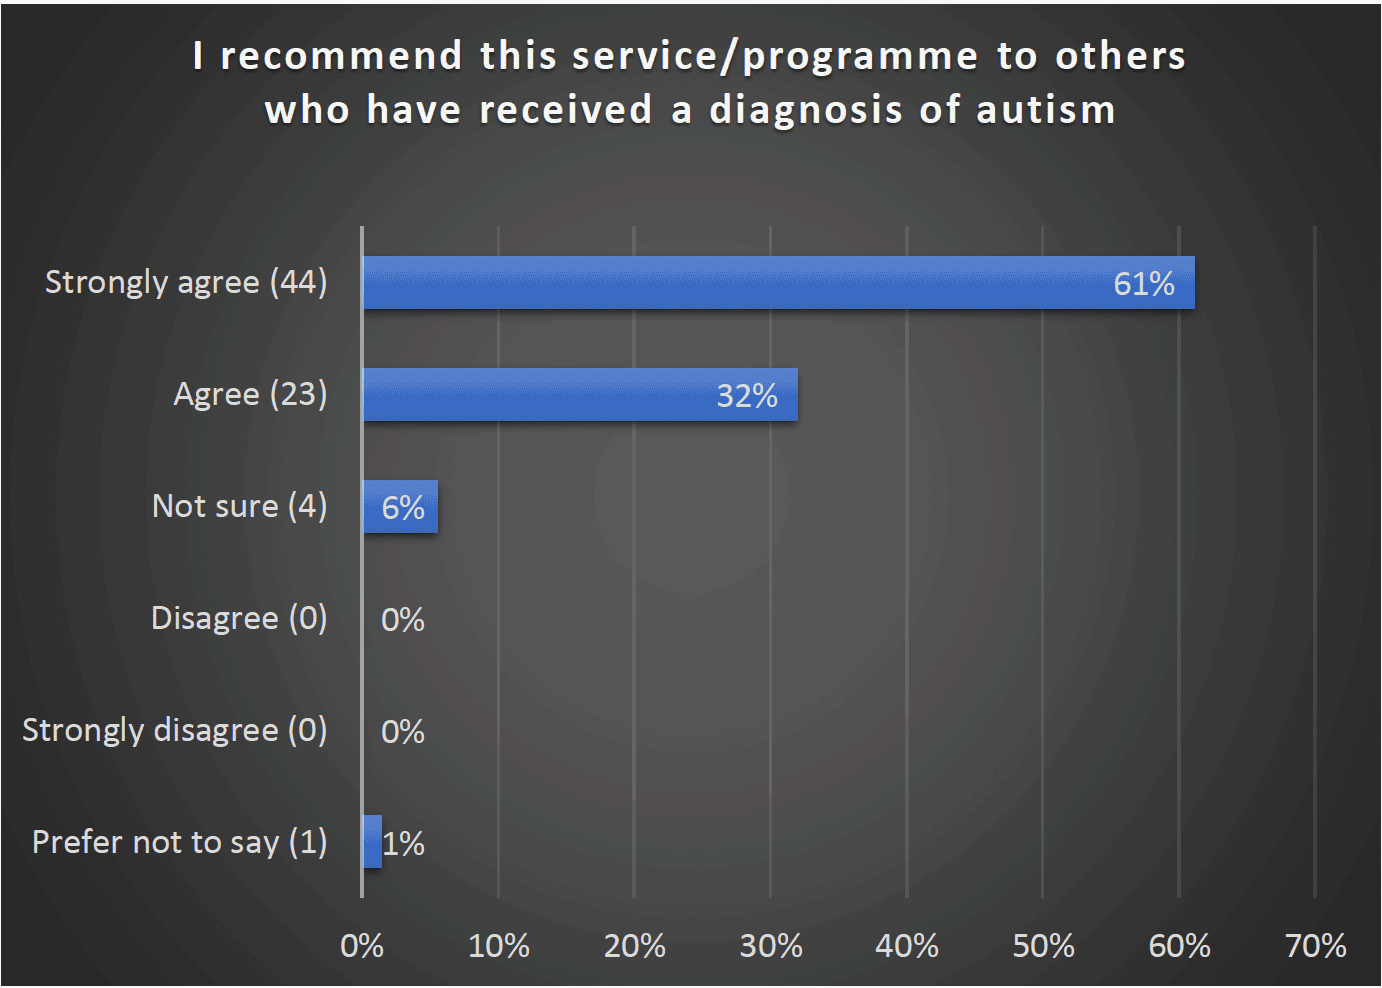 I recommend this service/programme to others who have received a diagnosis of autism - Strongly agree (44) 61%, Agree (23) 32%, Not sure (4) 6%, Disagree 0, Strongly disagree 0, Prefer not to say (1) 1%